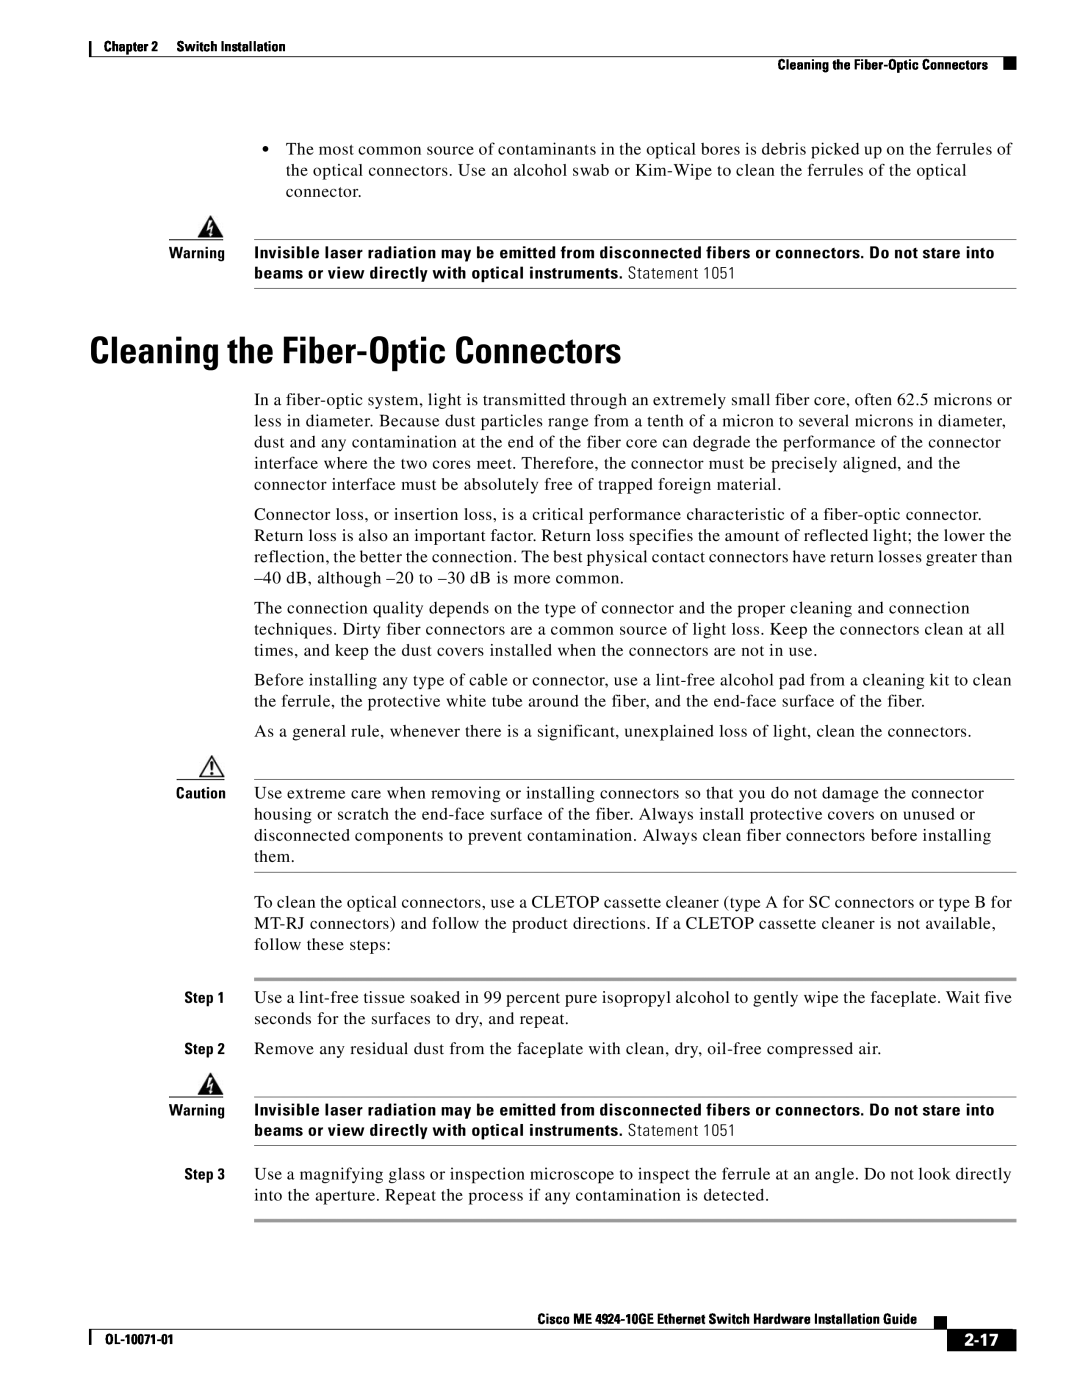 Cisco Systems ME 4924-10GE manual Cleaning the Fiber-Optic Connectors, 2-17 